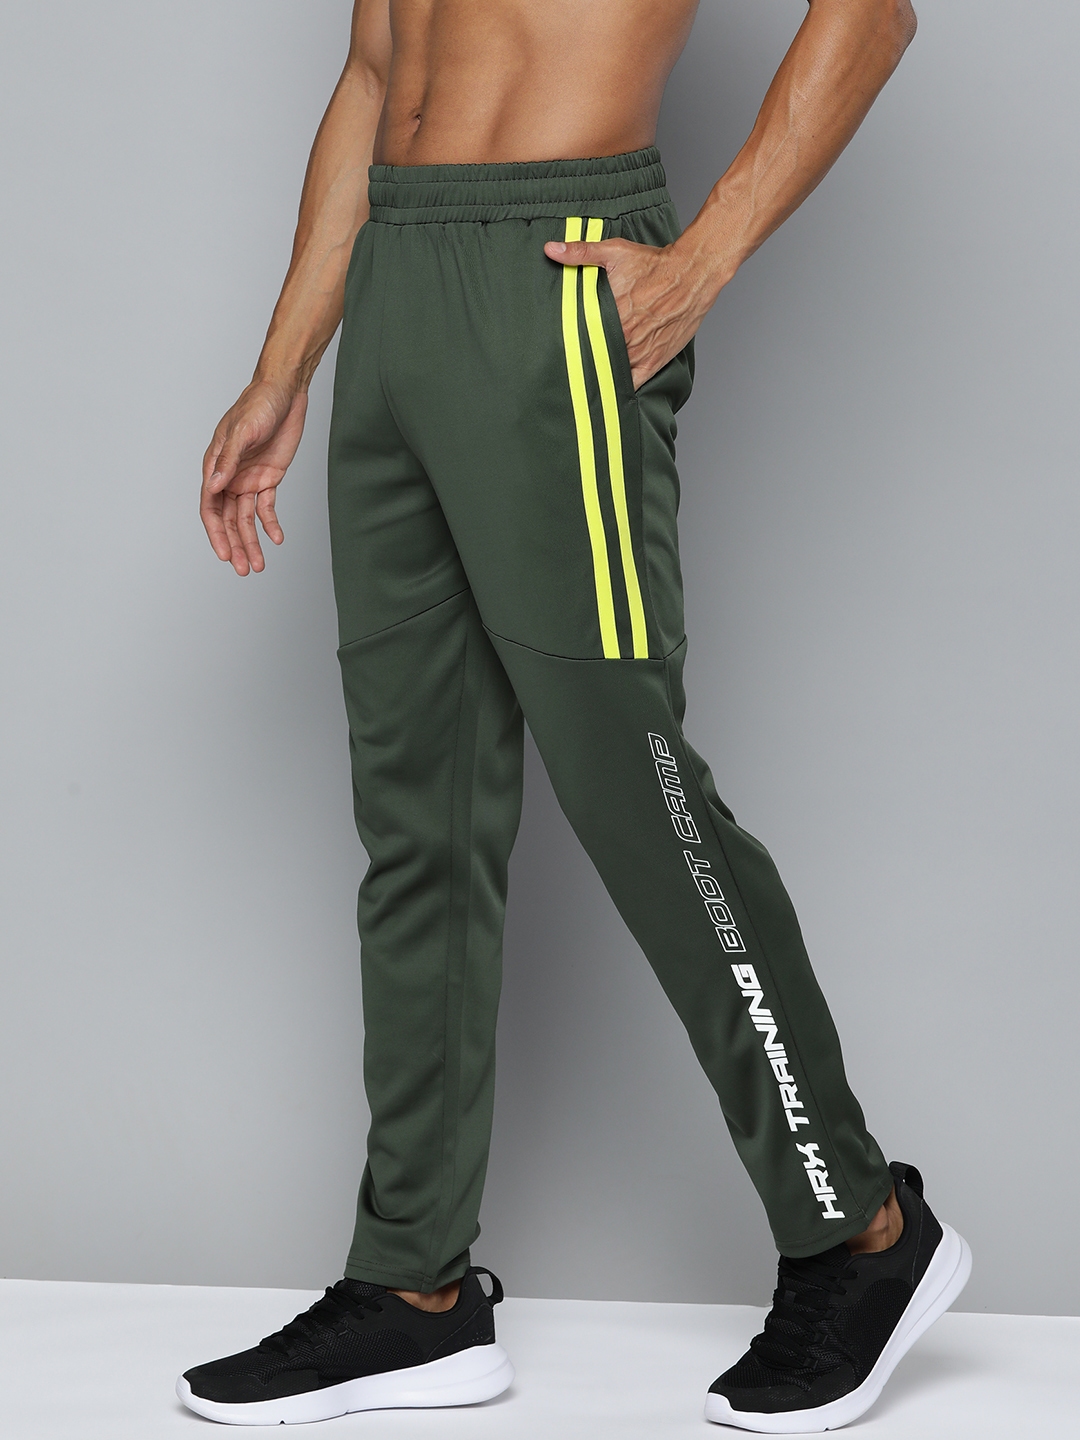 HRX by Hrithik Roshan Women Grey Melange Track Pants Price in India Full  Specifications  Offers  DTashioncom